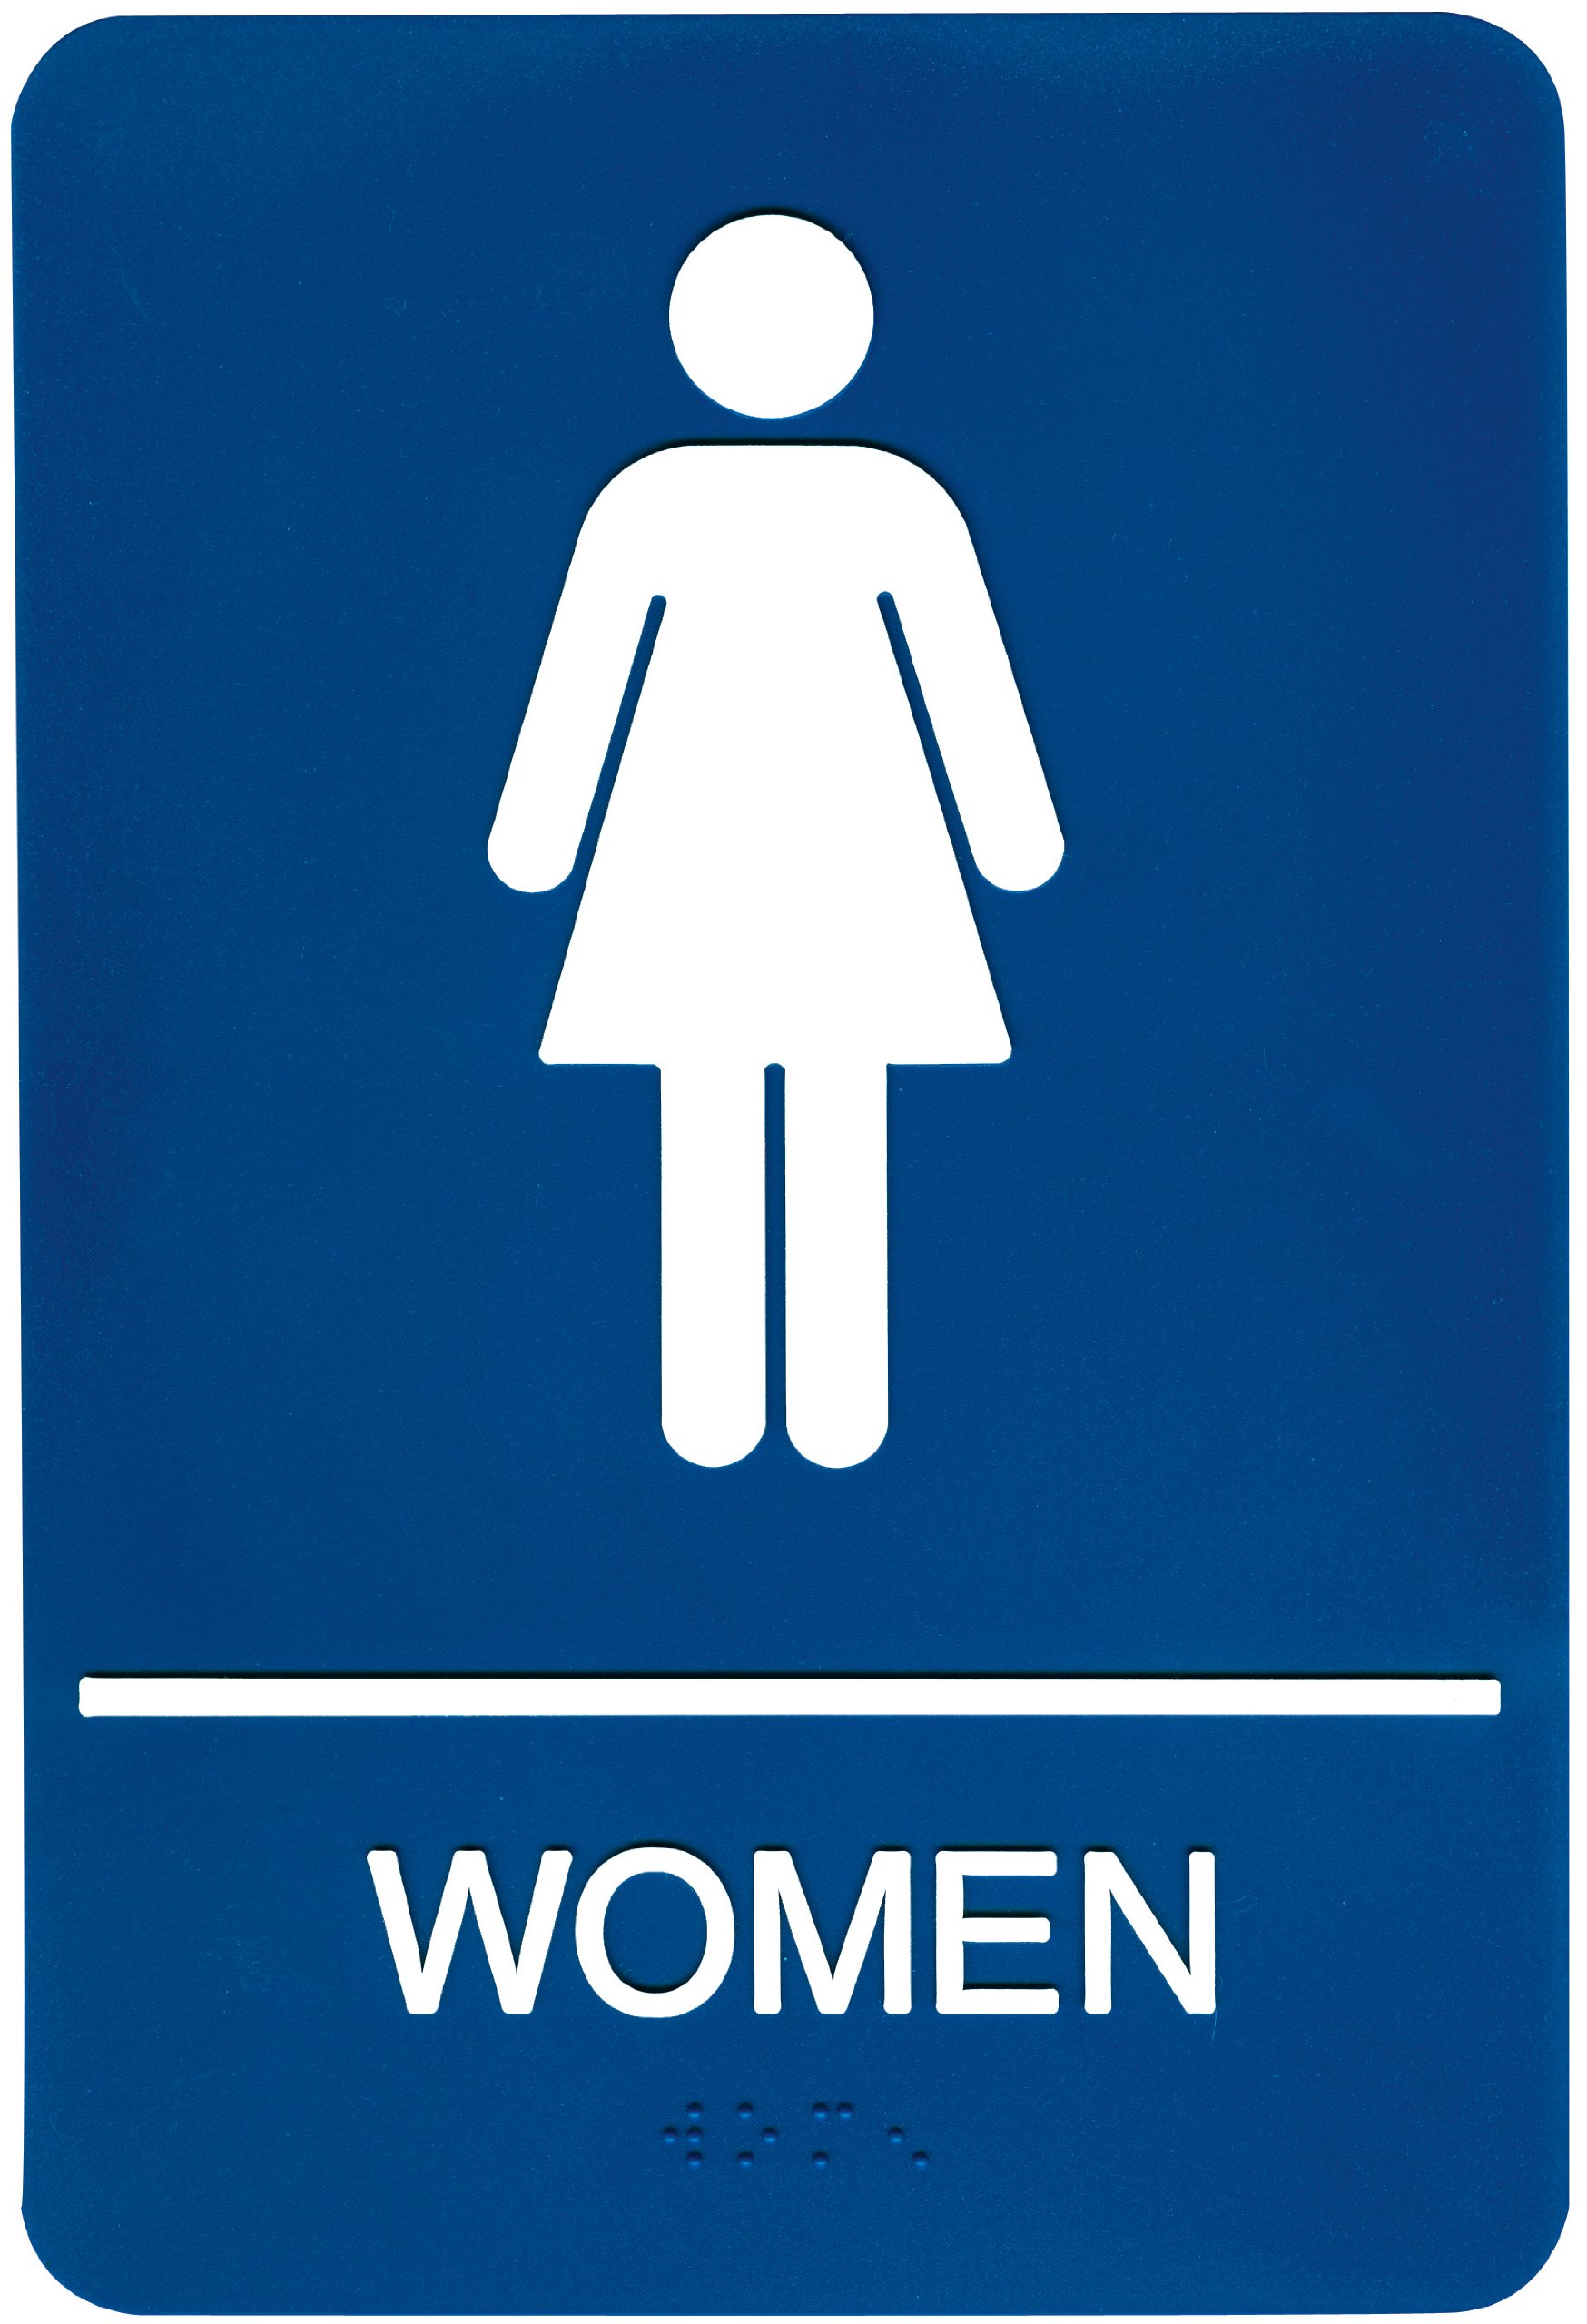 WoMENS RESTROOM SIGN Free Download Clip Art Free Clip Art on